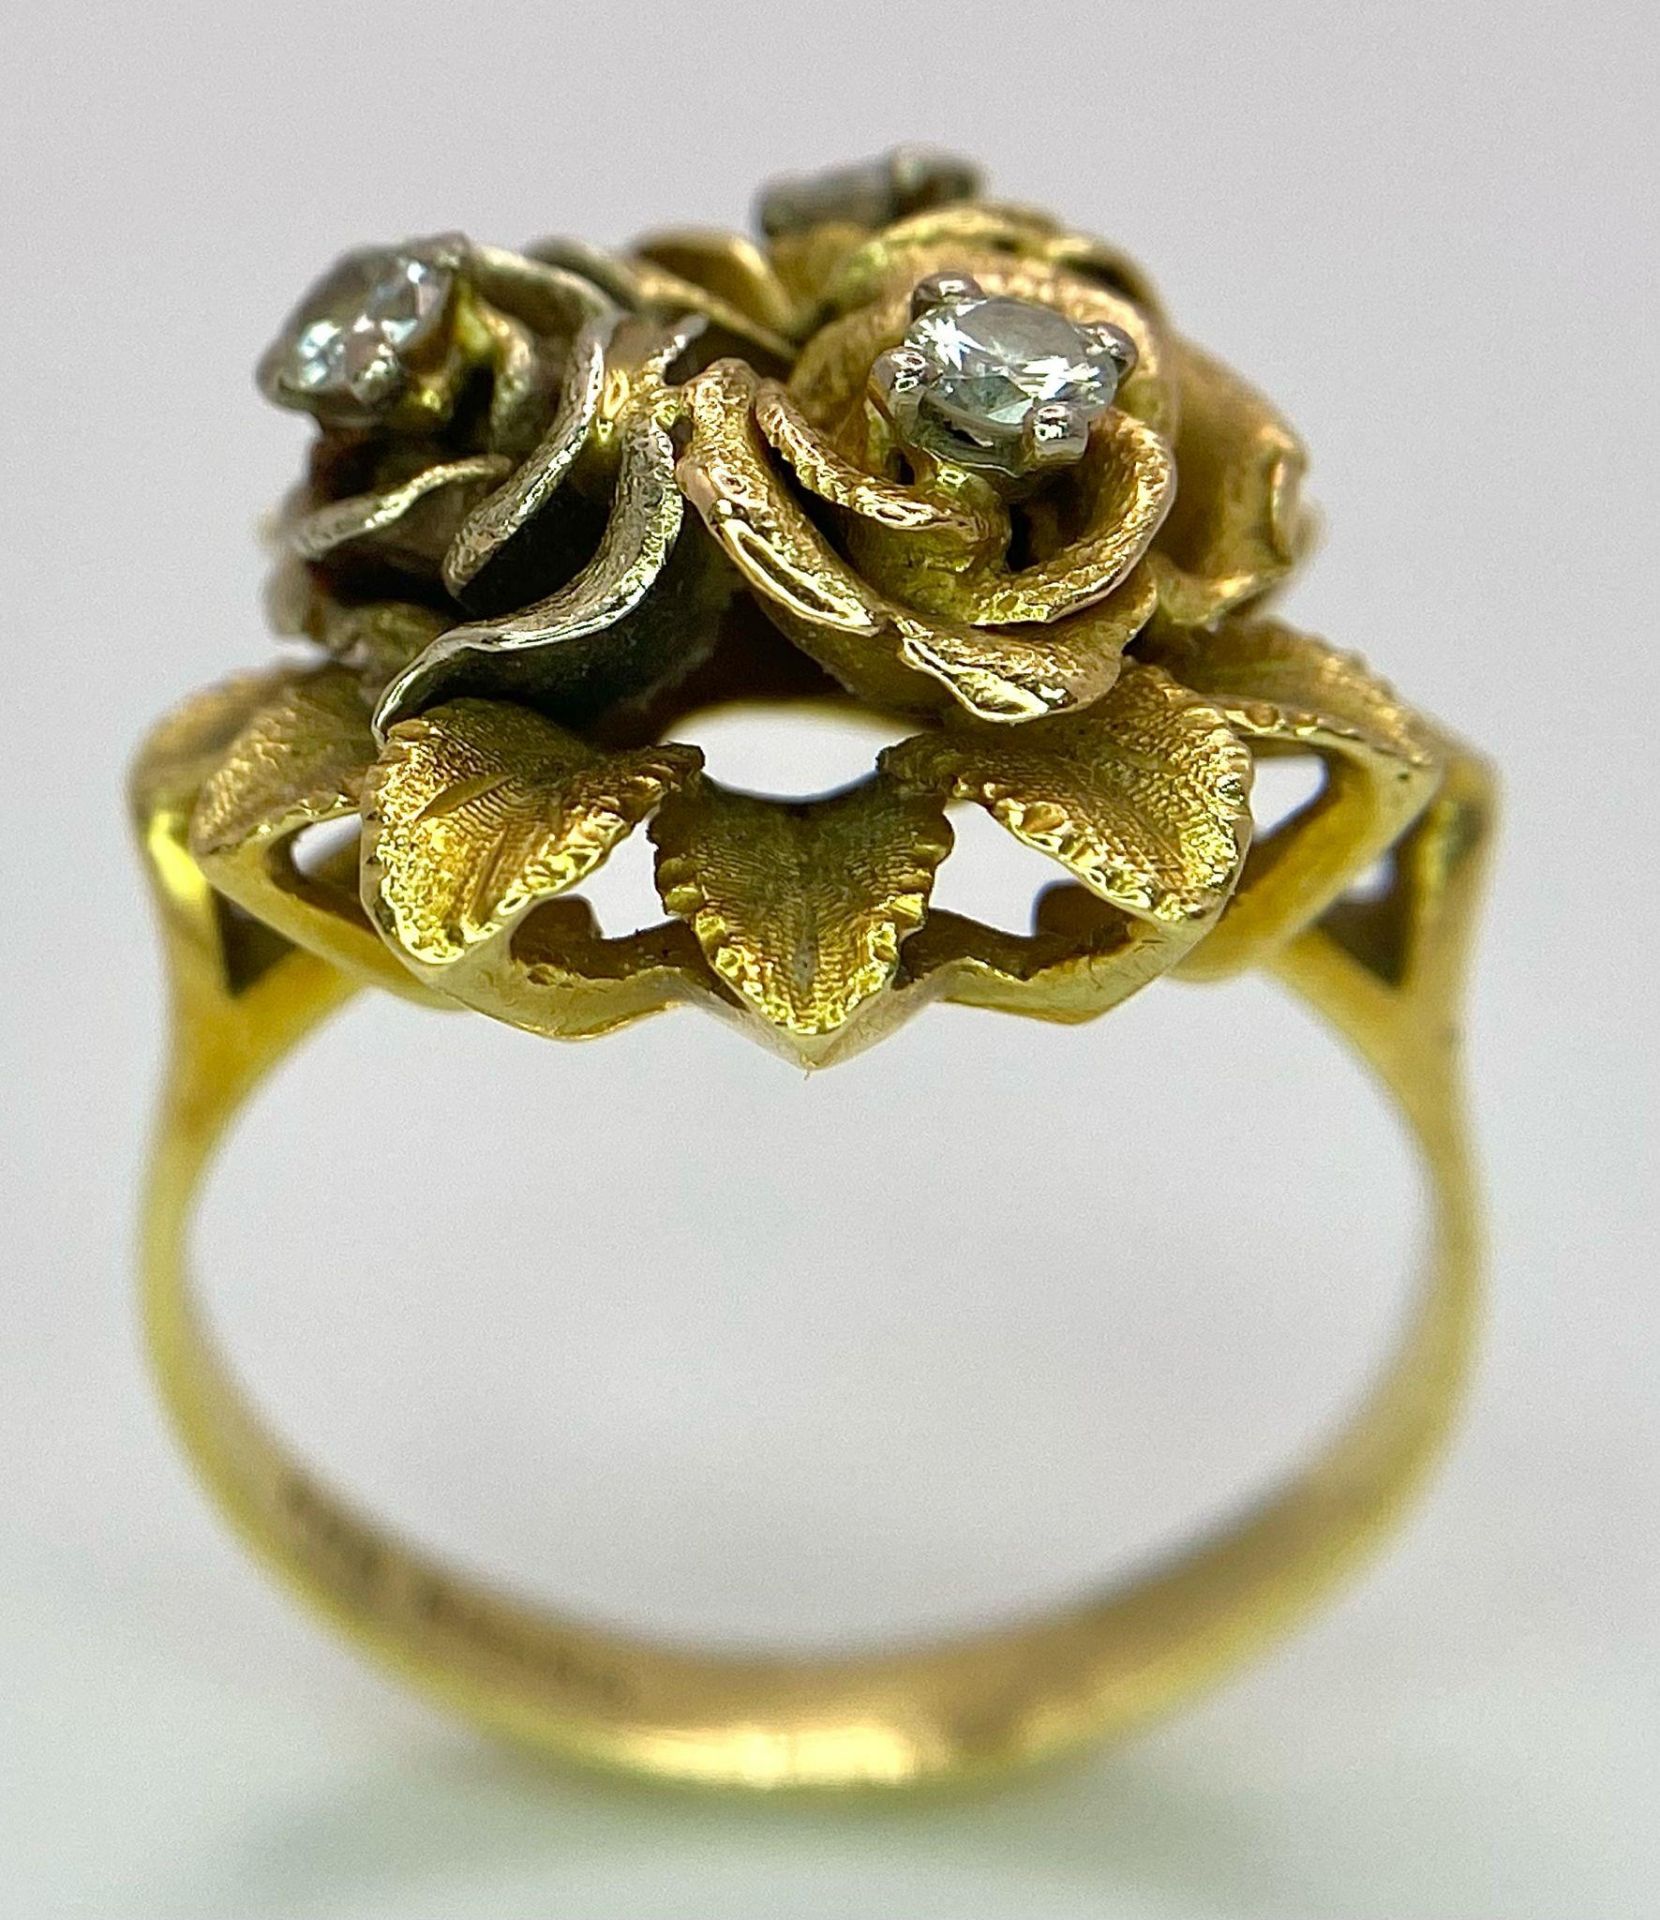 An 18K Yellow Gold and Diamond Floral Design Ring. A rich cluster of golden petals give sanctuary to - Image 5 of 10